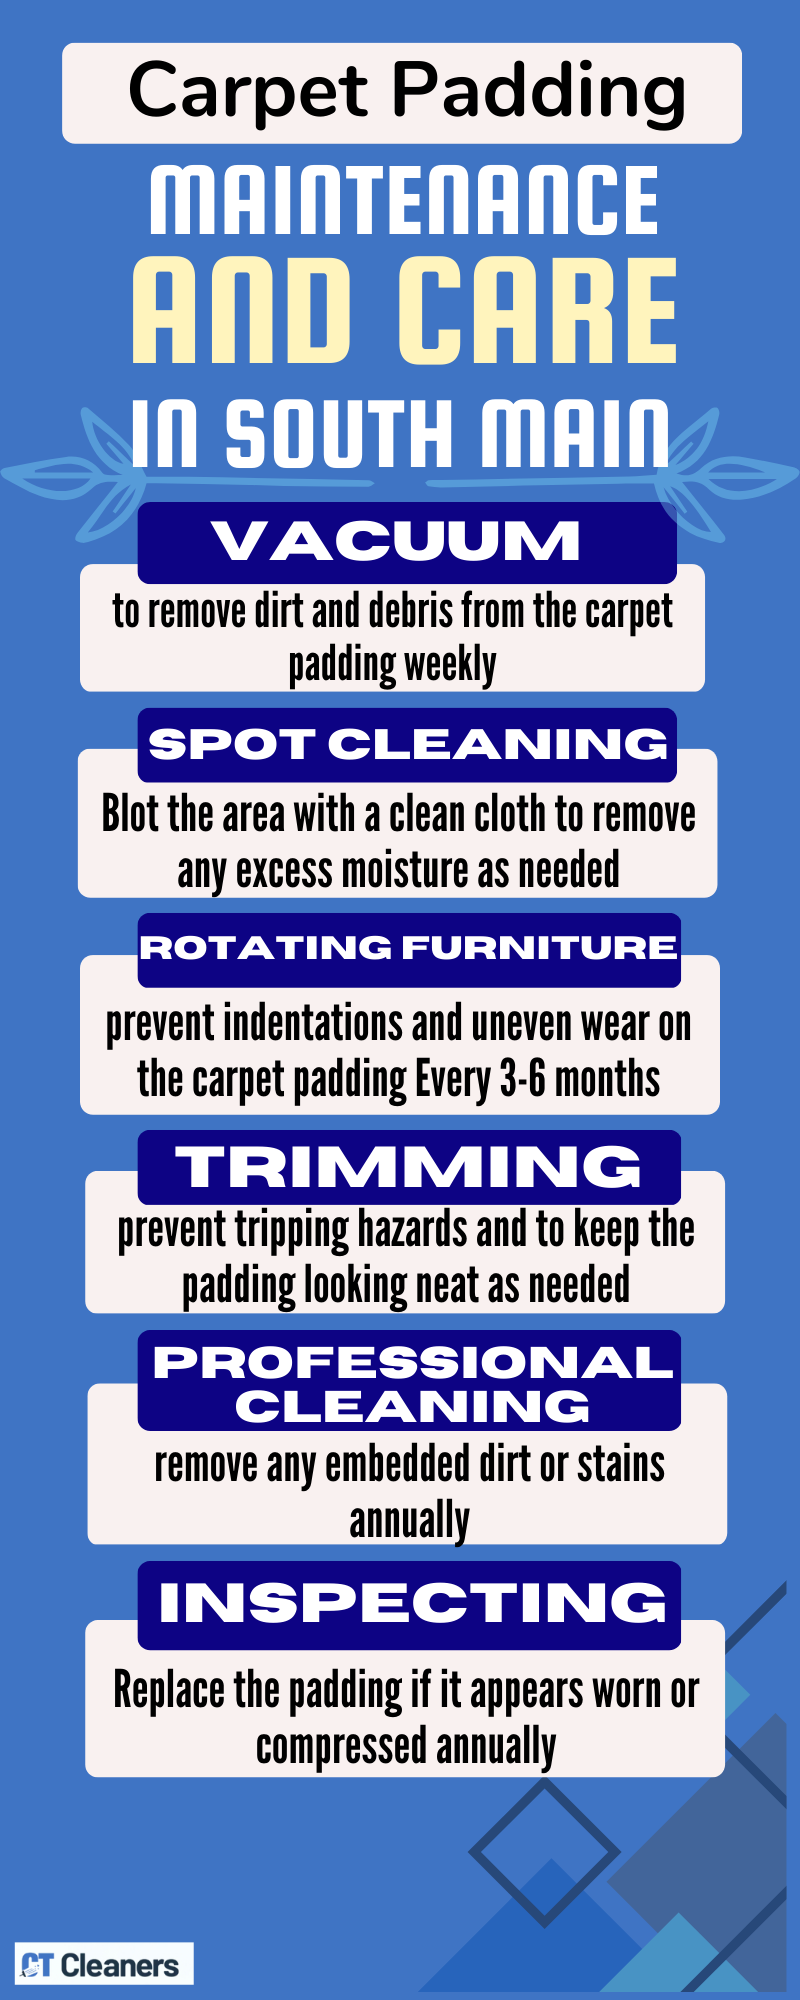 Carpet Padding Maintenance and Care in South Main